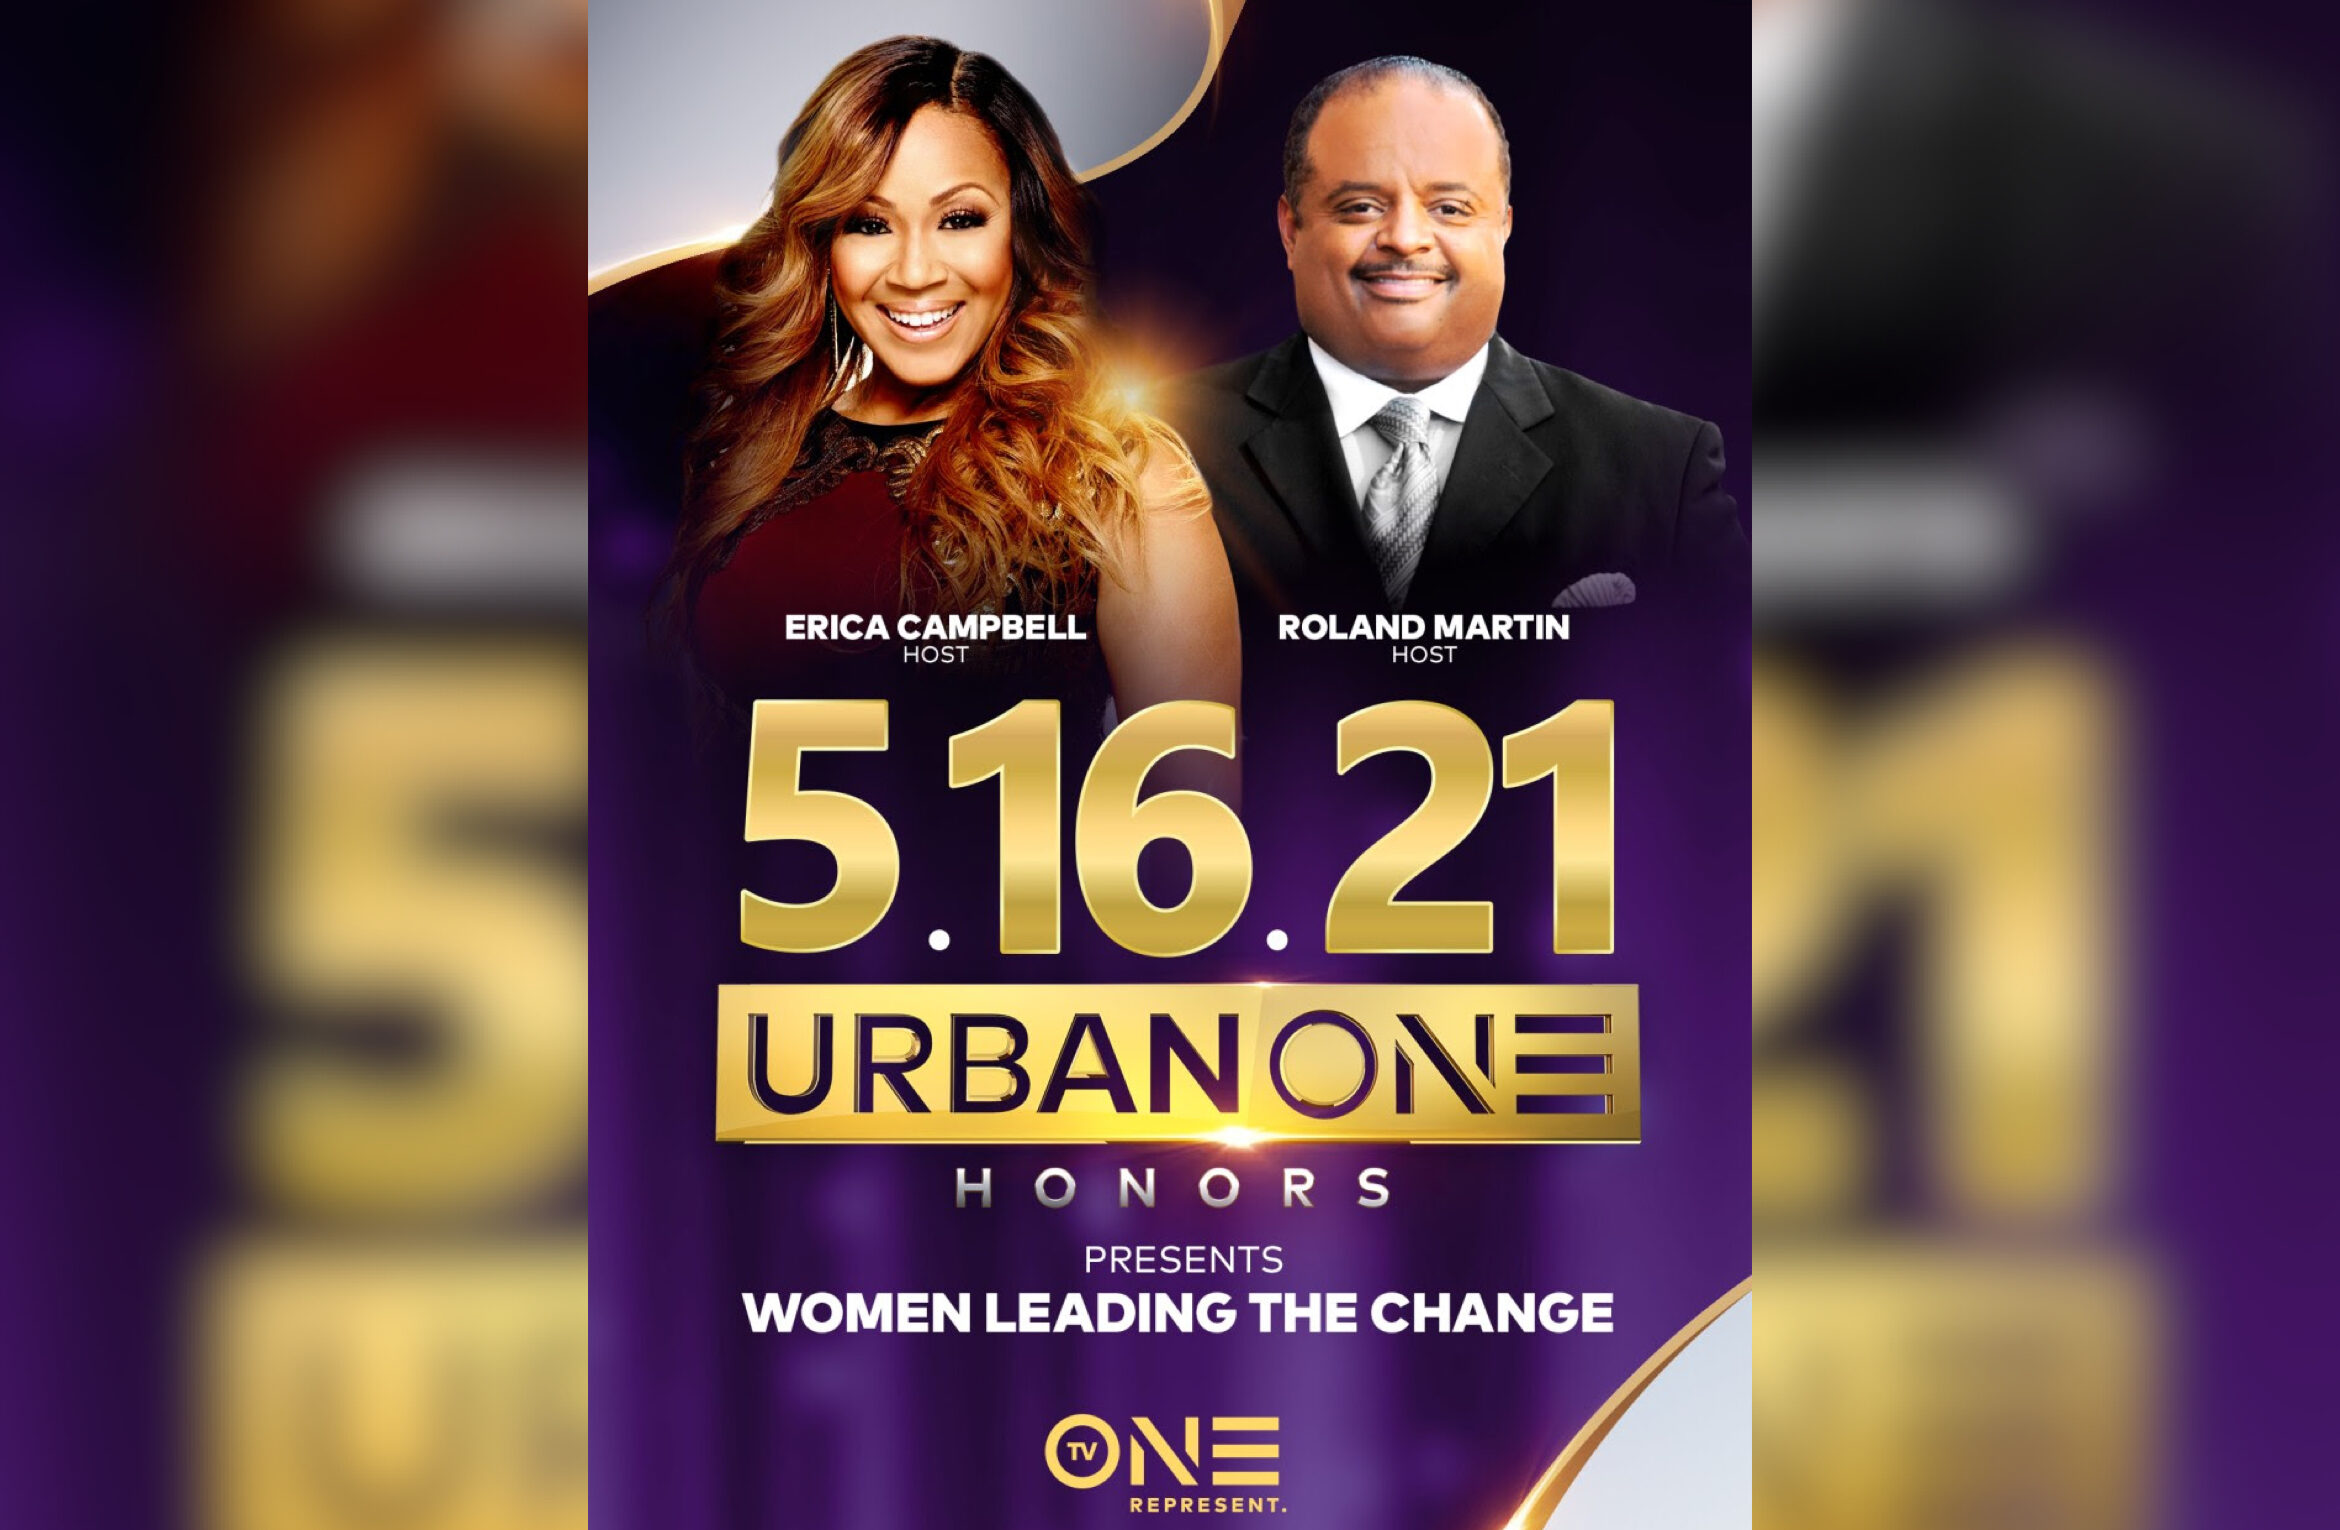 Erica Campbell & Roland Martin to Host URBAN ONE HONORS 